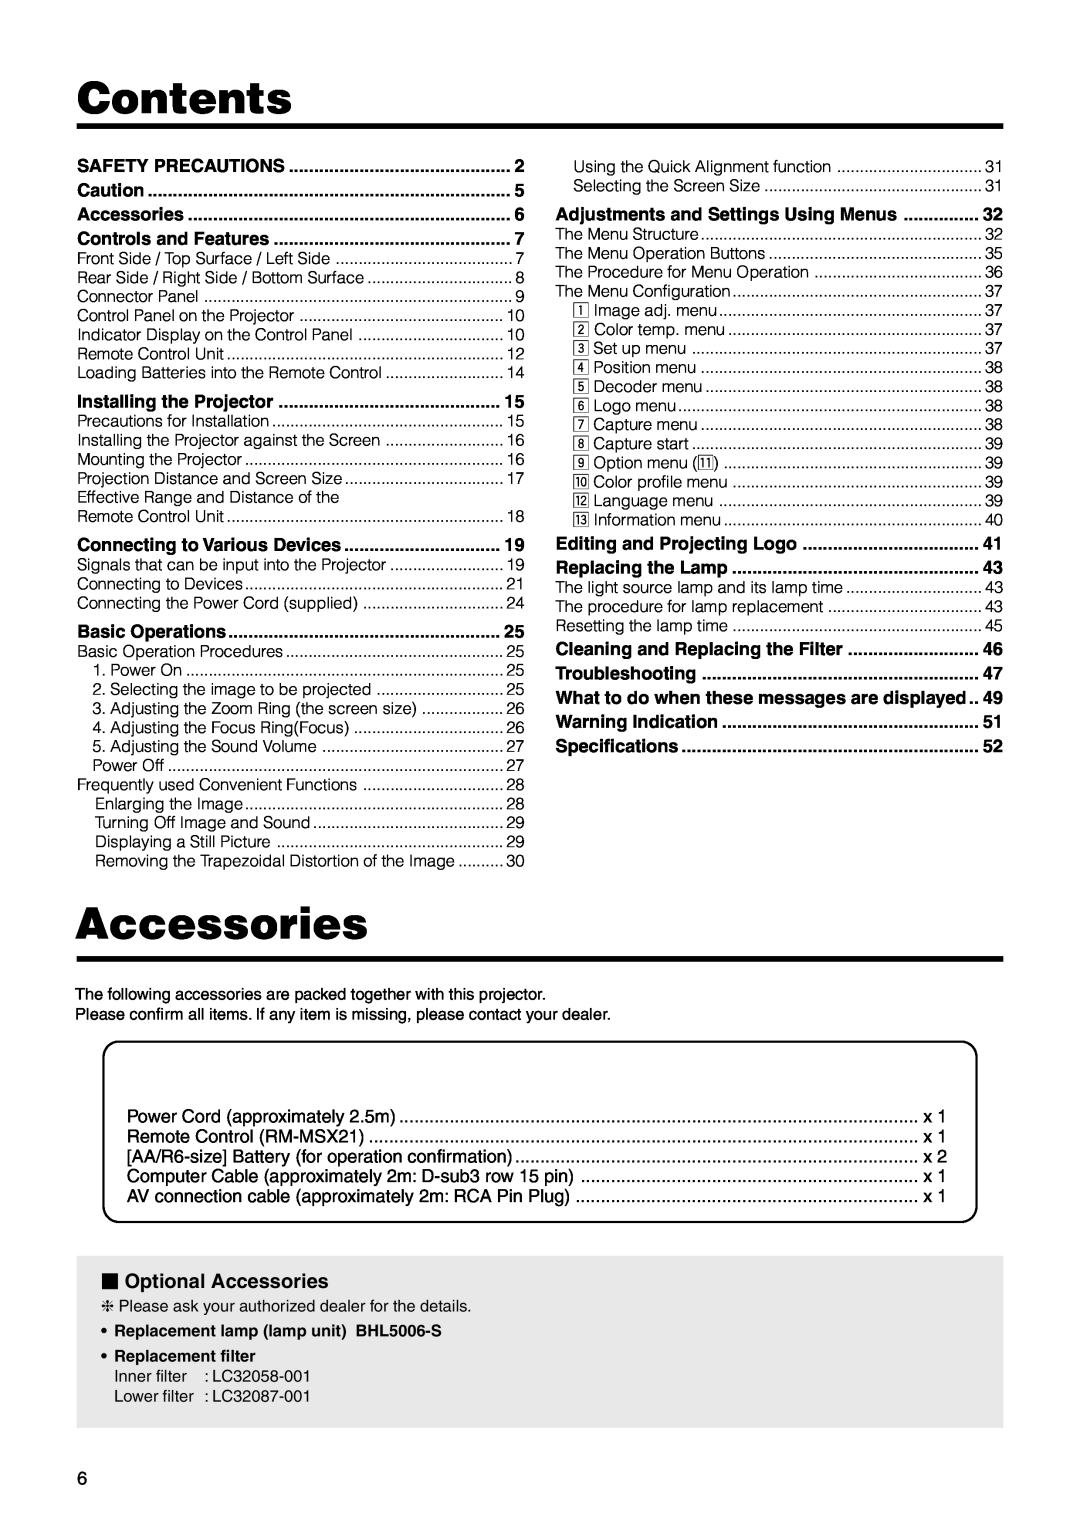 Dukane 28A9017 user manual Contents,  Optional Accessories, Adjustments and Settings Using Menus, Safety Precautions 